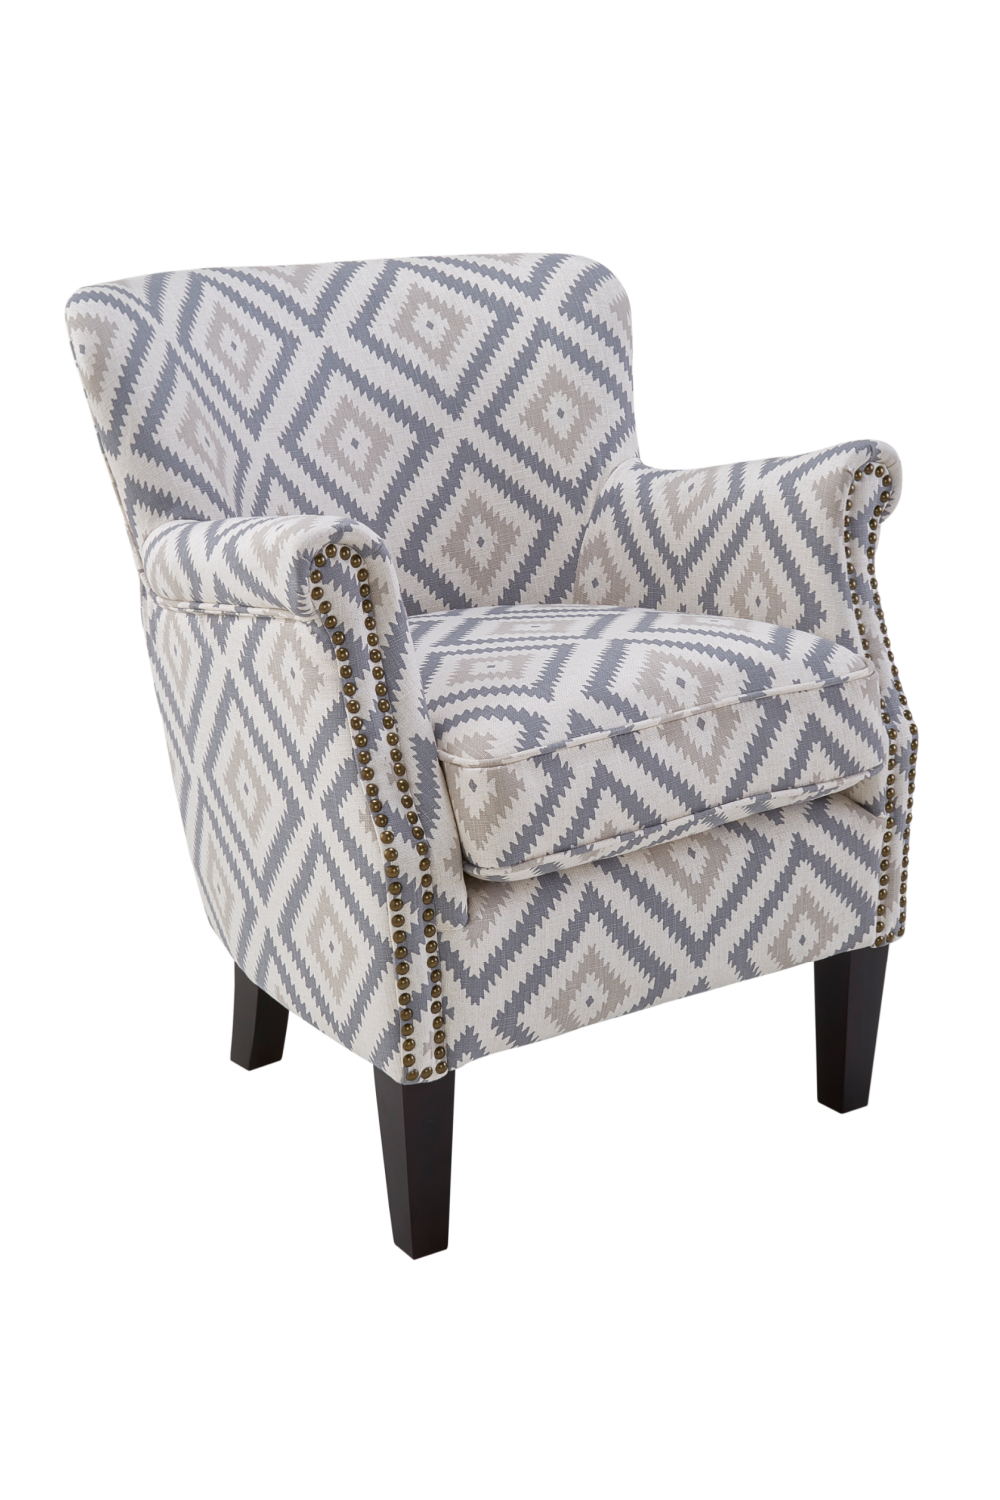 Gray Geometric Upholstered Accent Armchair | Andrew Martin | OROA